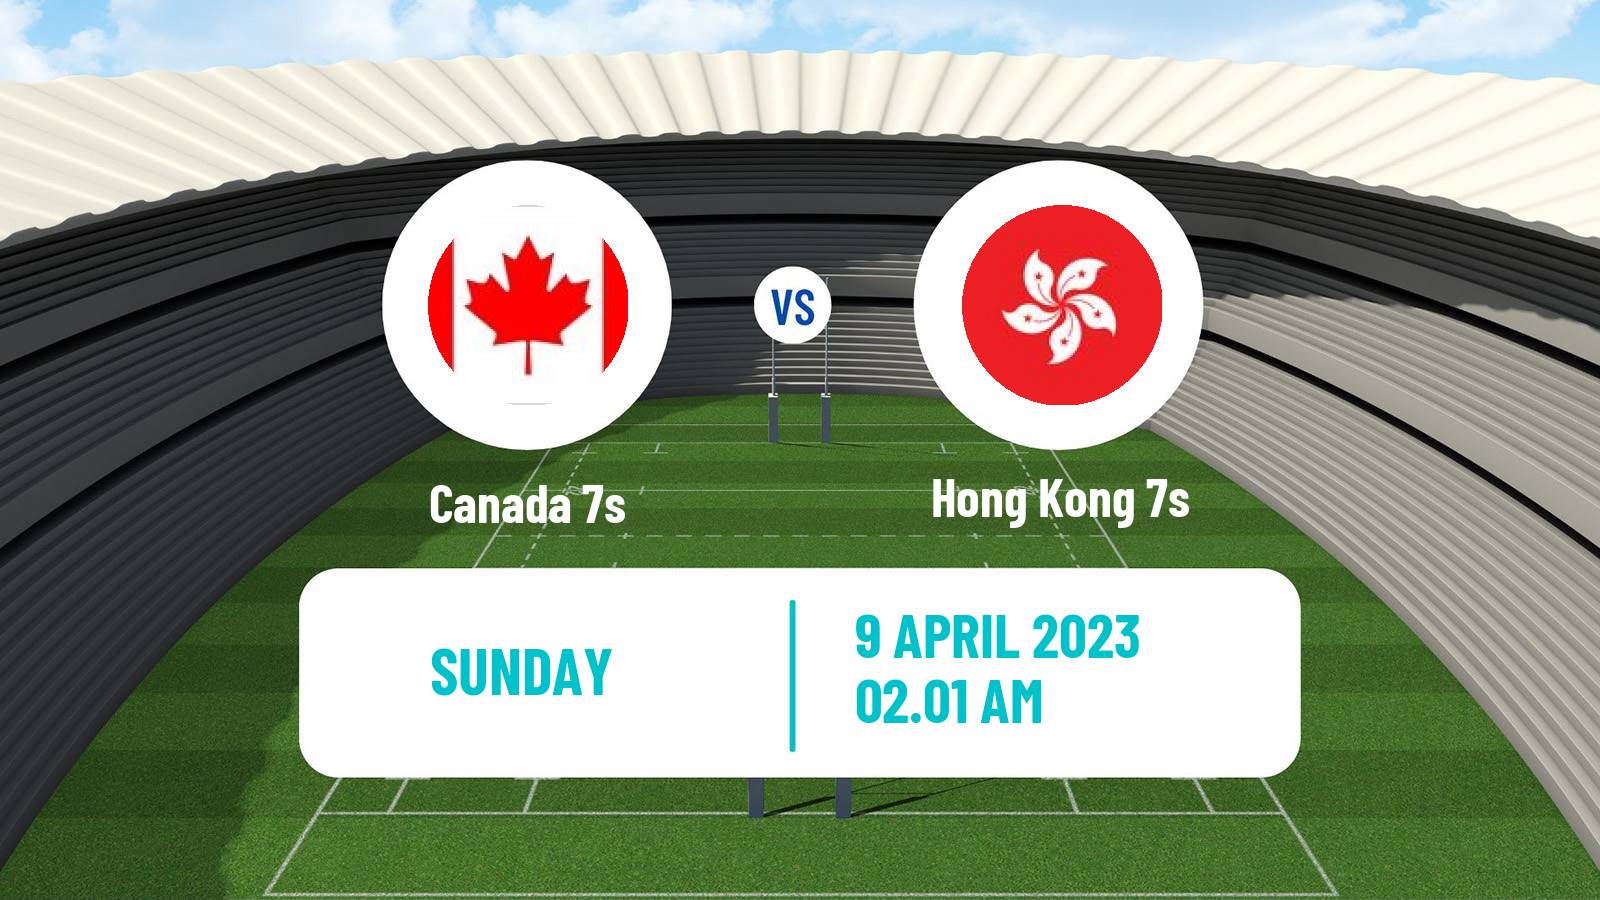 Rugby union Sevens World Series - Singapore Canada 7s - Hong Kong 7s